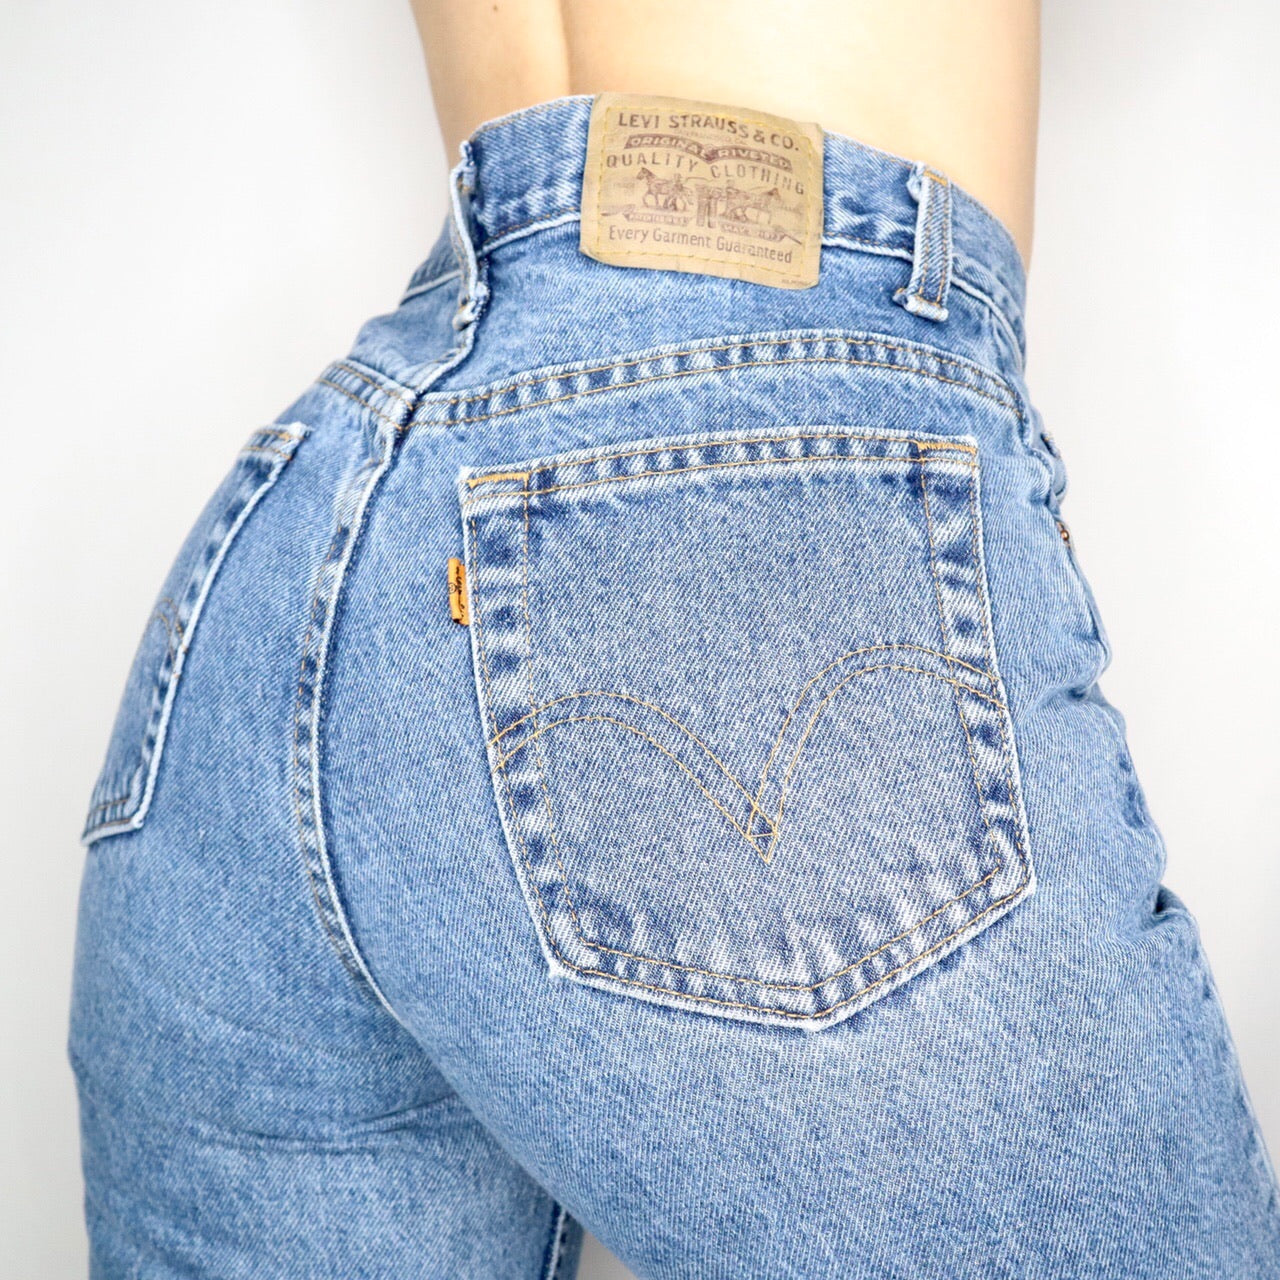 Vintage Late 90s High Waisted Levis Jeans